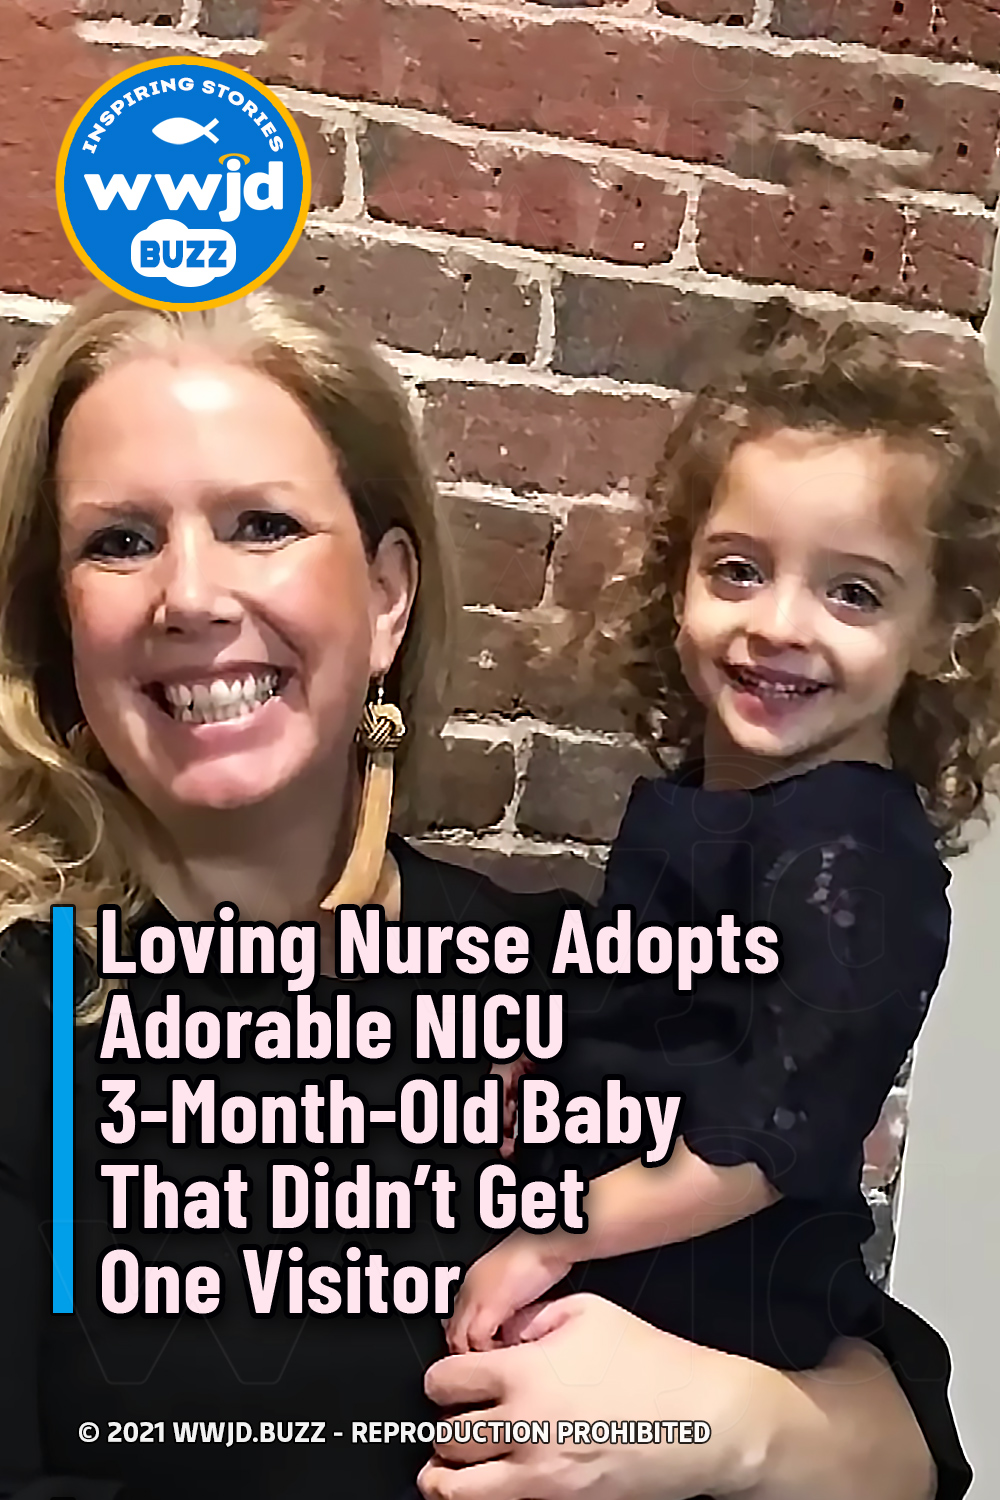 Loving Nurse Adopts Adorable NICU 3-Month-Old Baby That Didn’t Get One Visitor